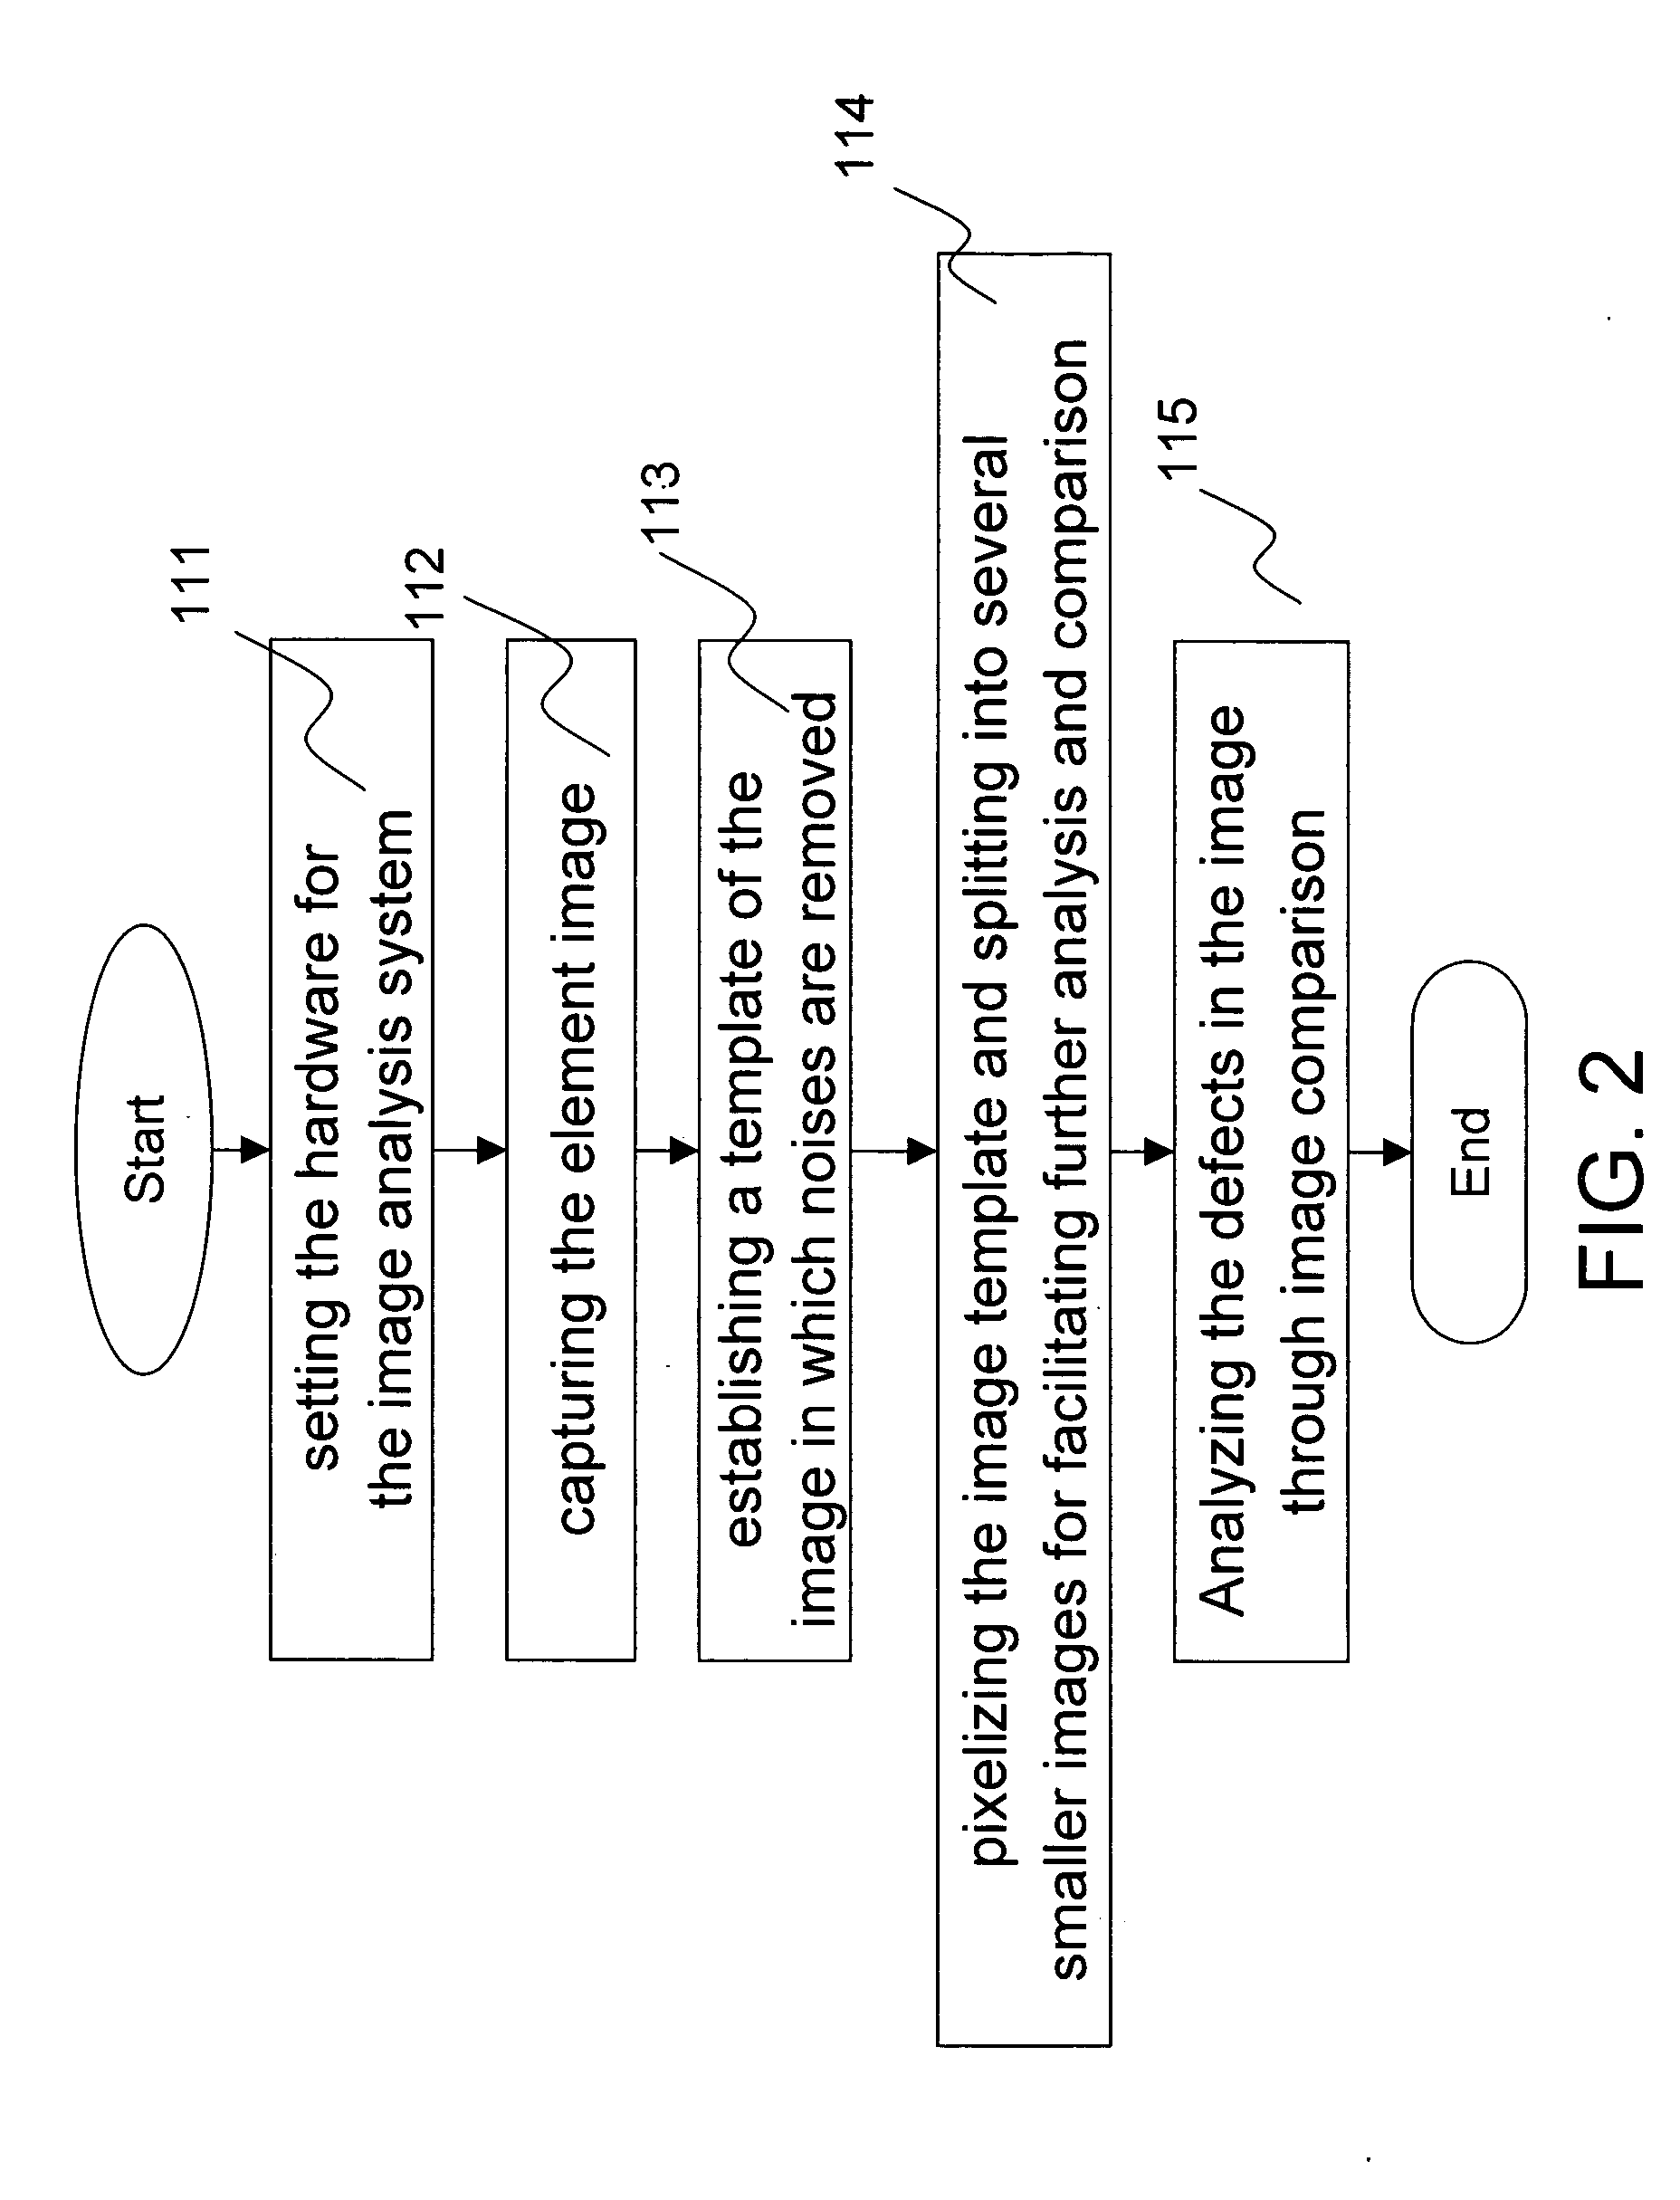 Method for patching element defects by ink-jet printing